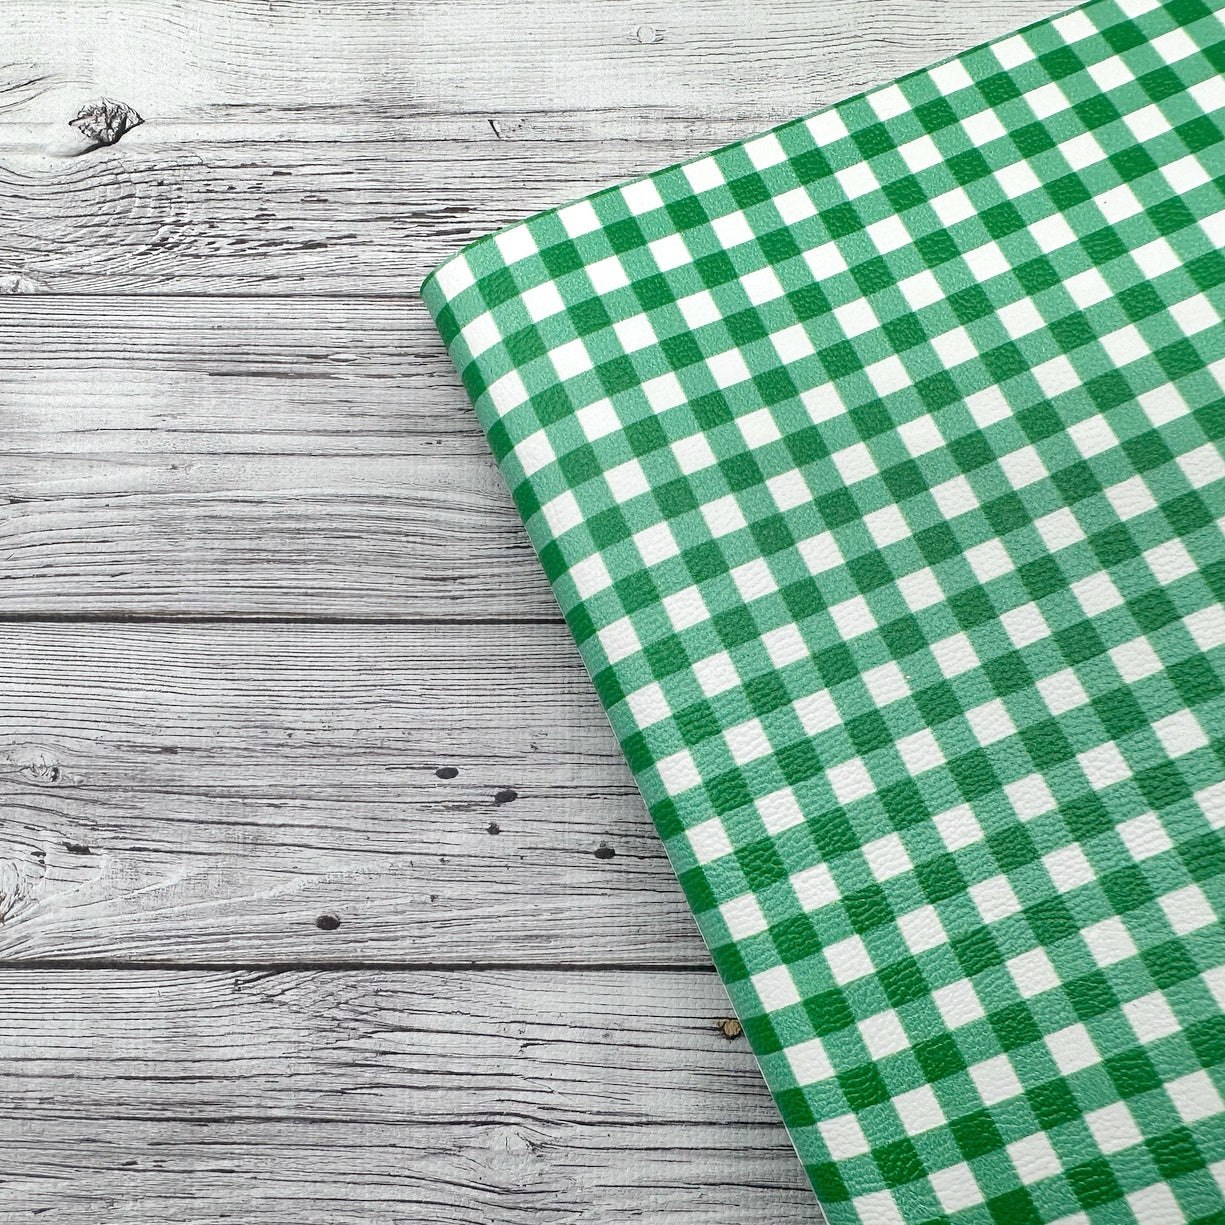 Emerald Green Gingham Standard Premium Faux Leather Fabric Sheets